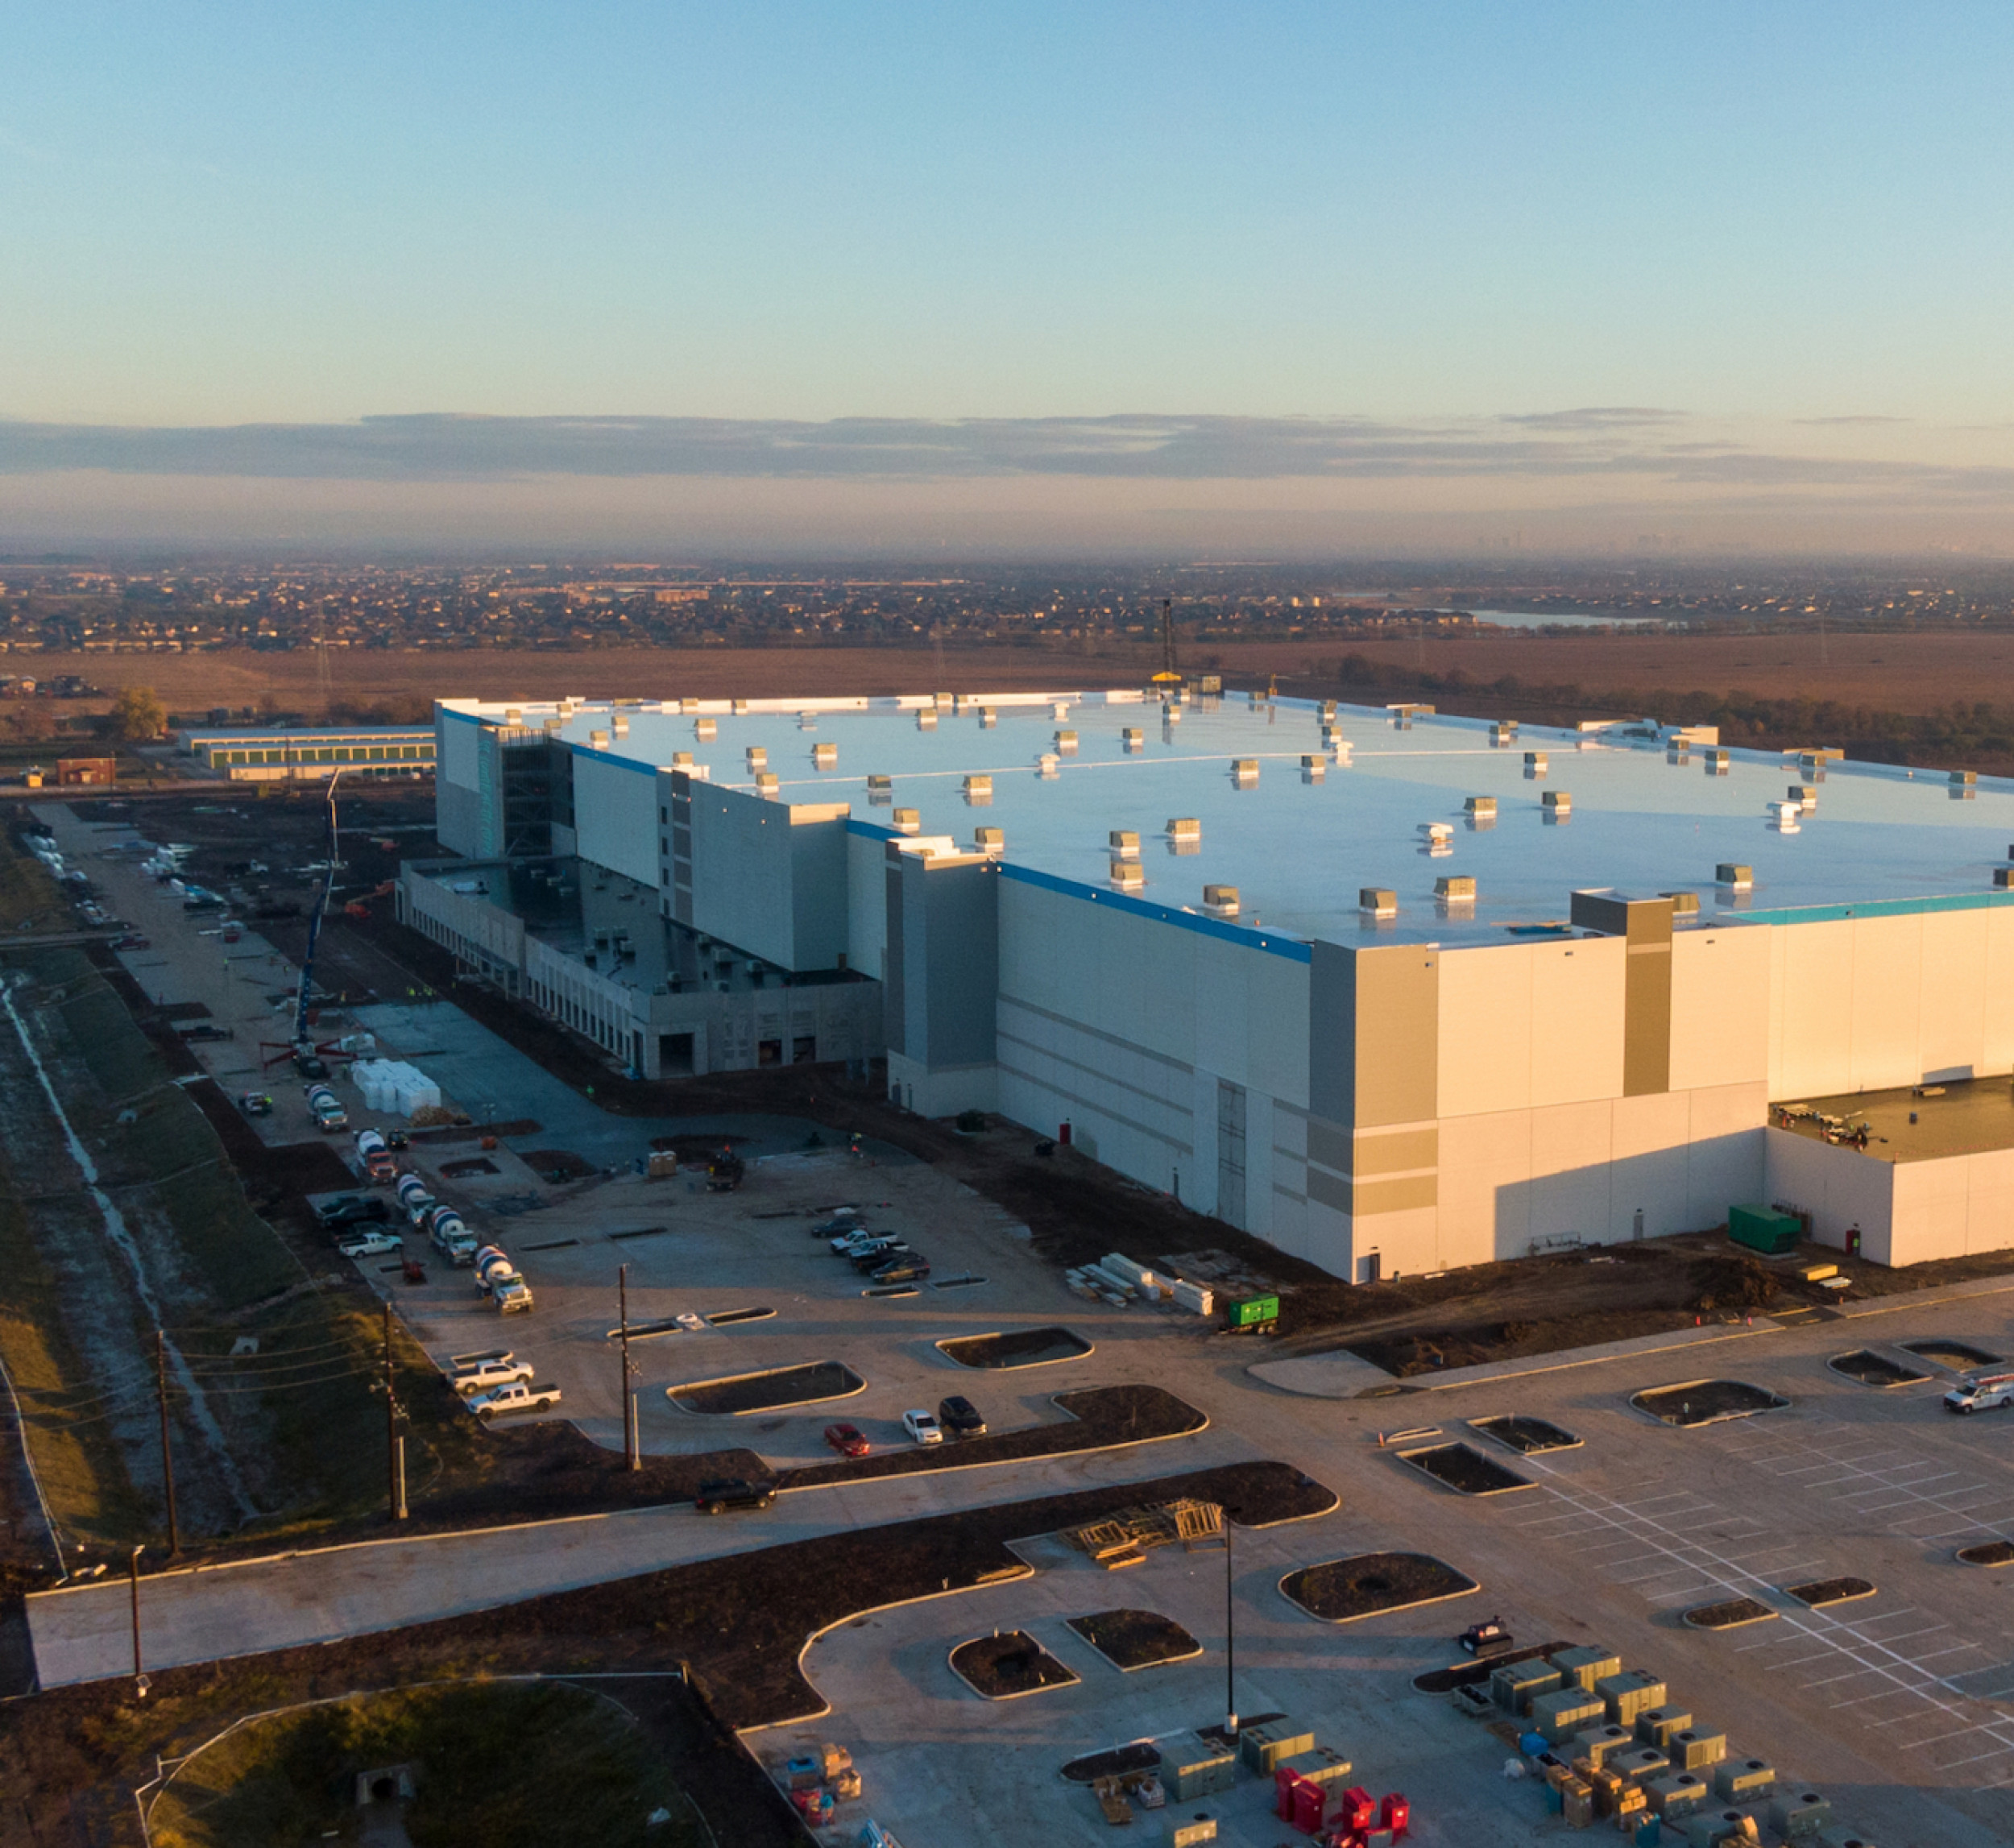 Sky view of a distribution center bulding